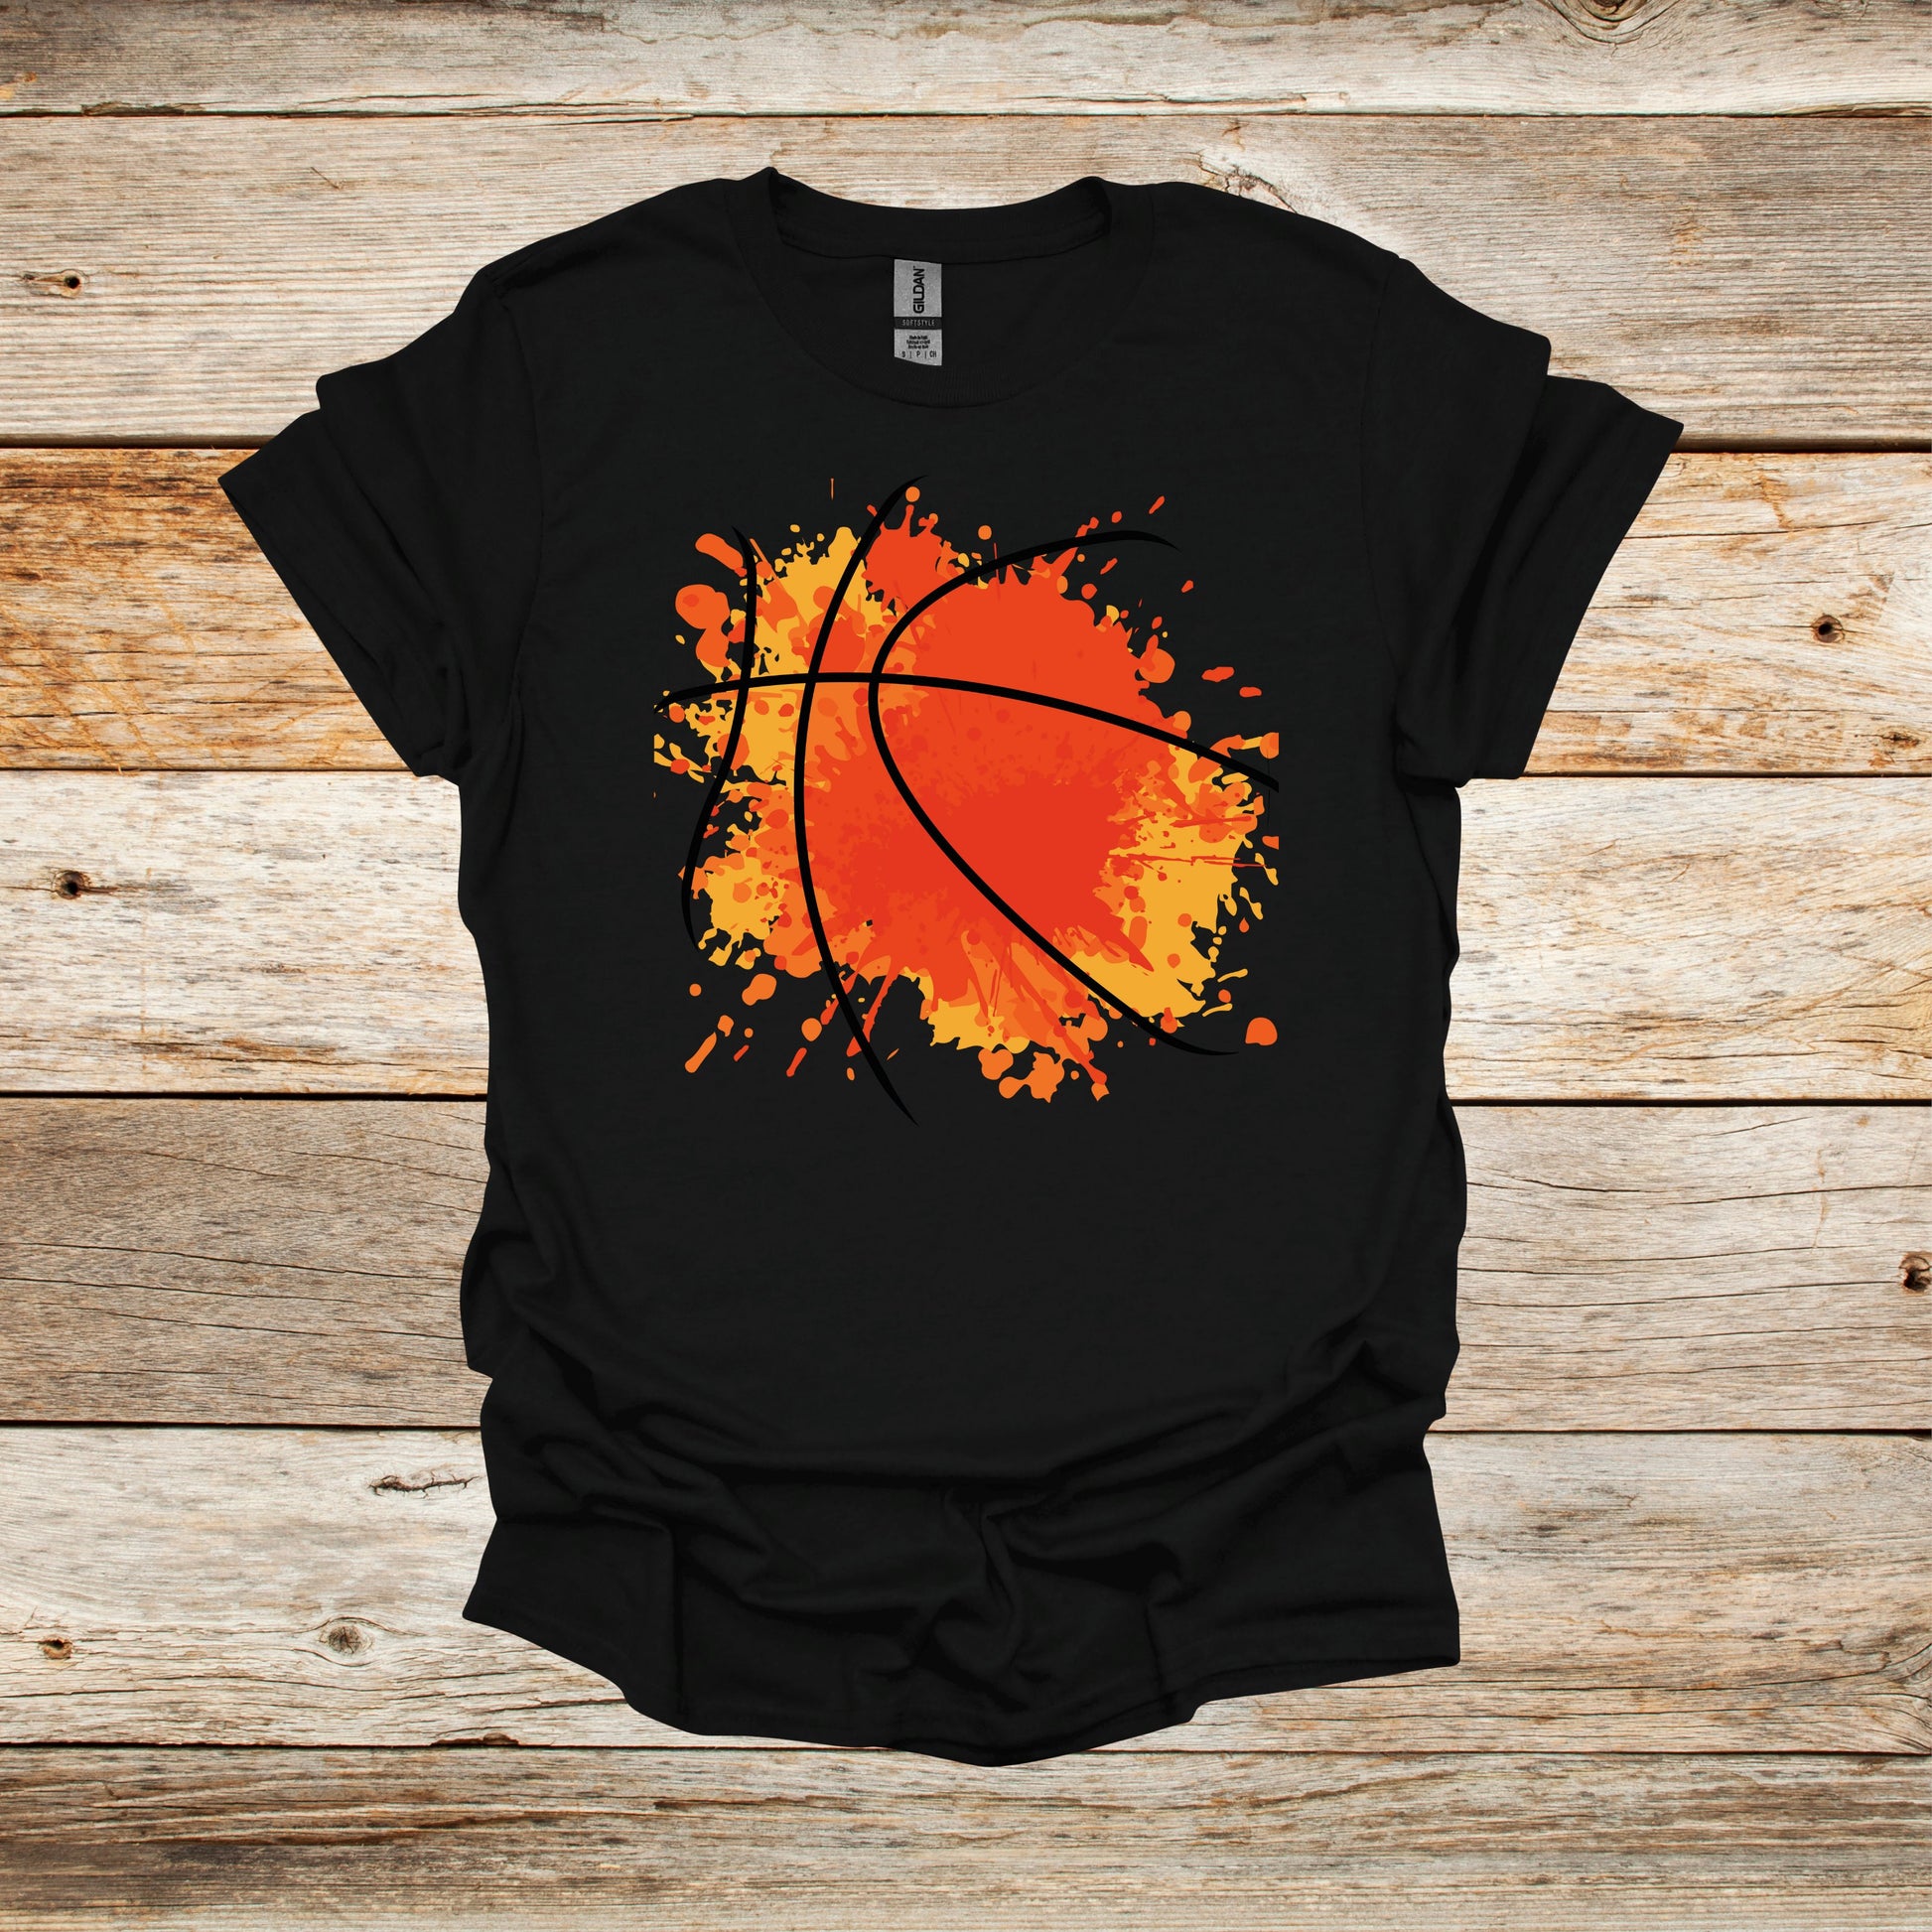 Basketball T-Shirt - Adult and Children's Tee Shirts - Sports T-Shirts Graphic Avenue Black Adult Small 